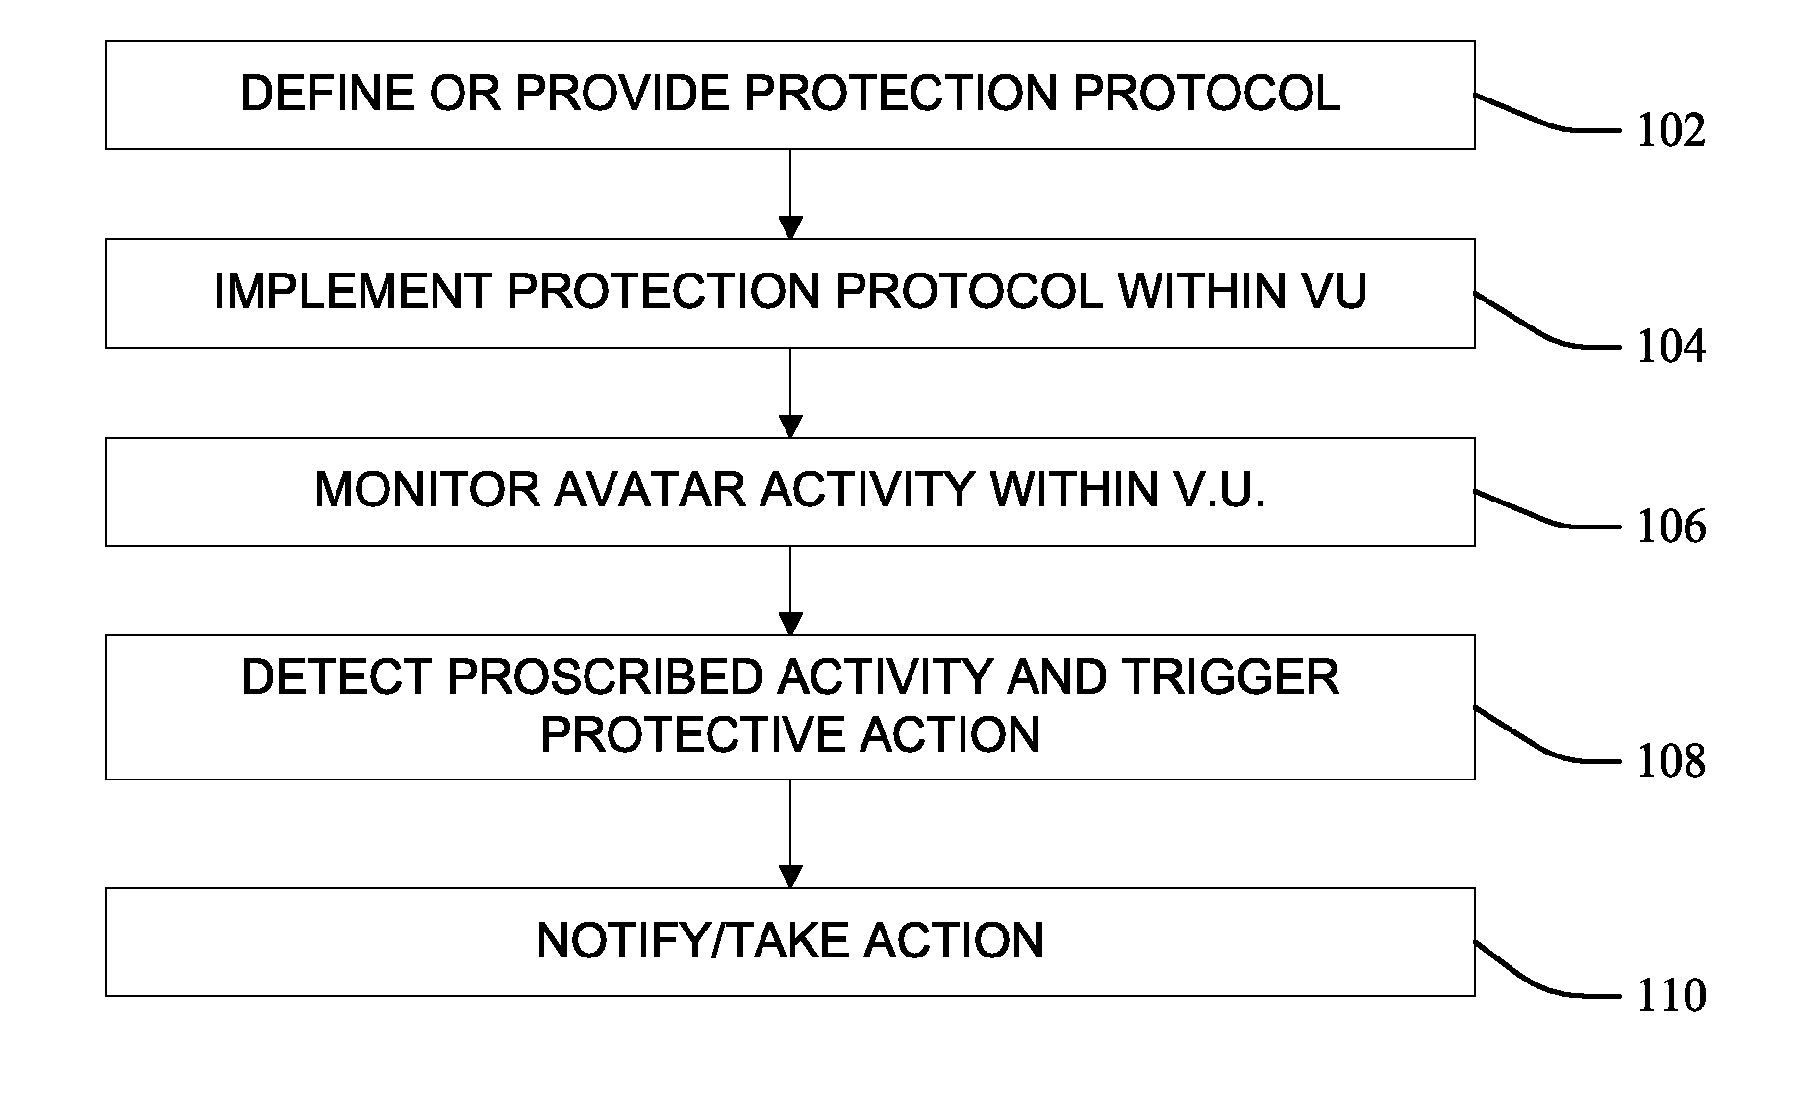 Avatar protection within a virtual universe